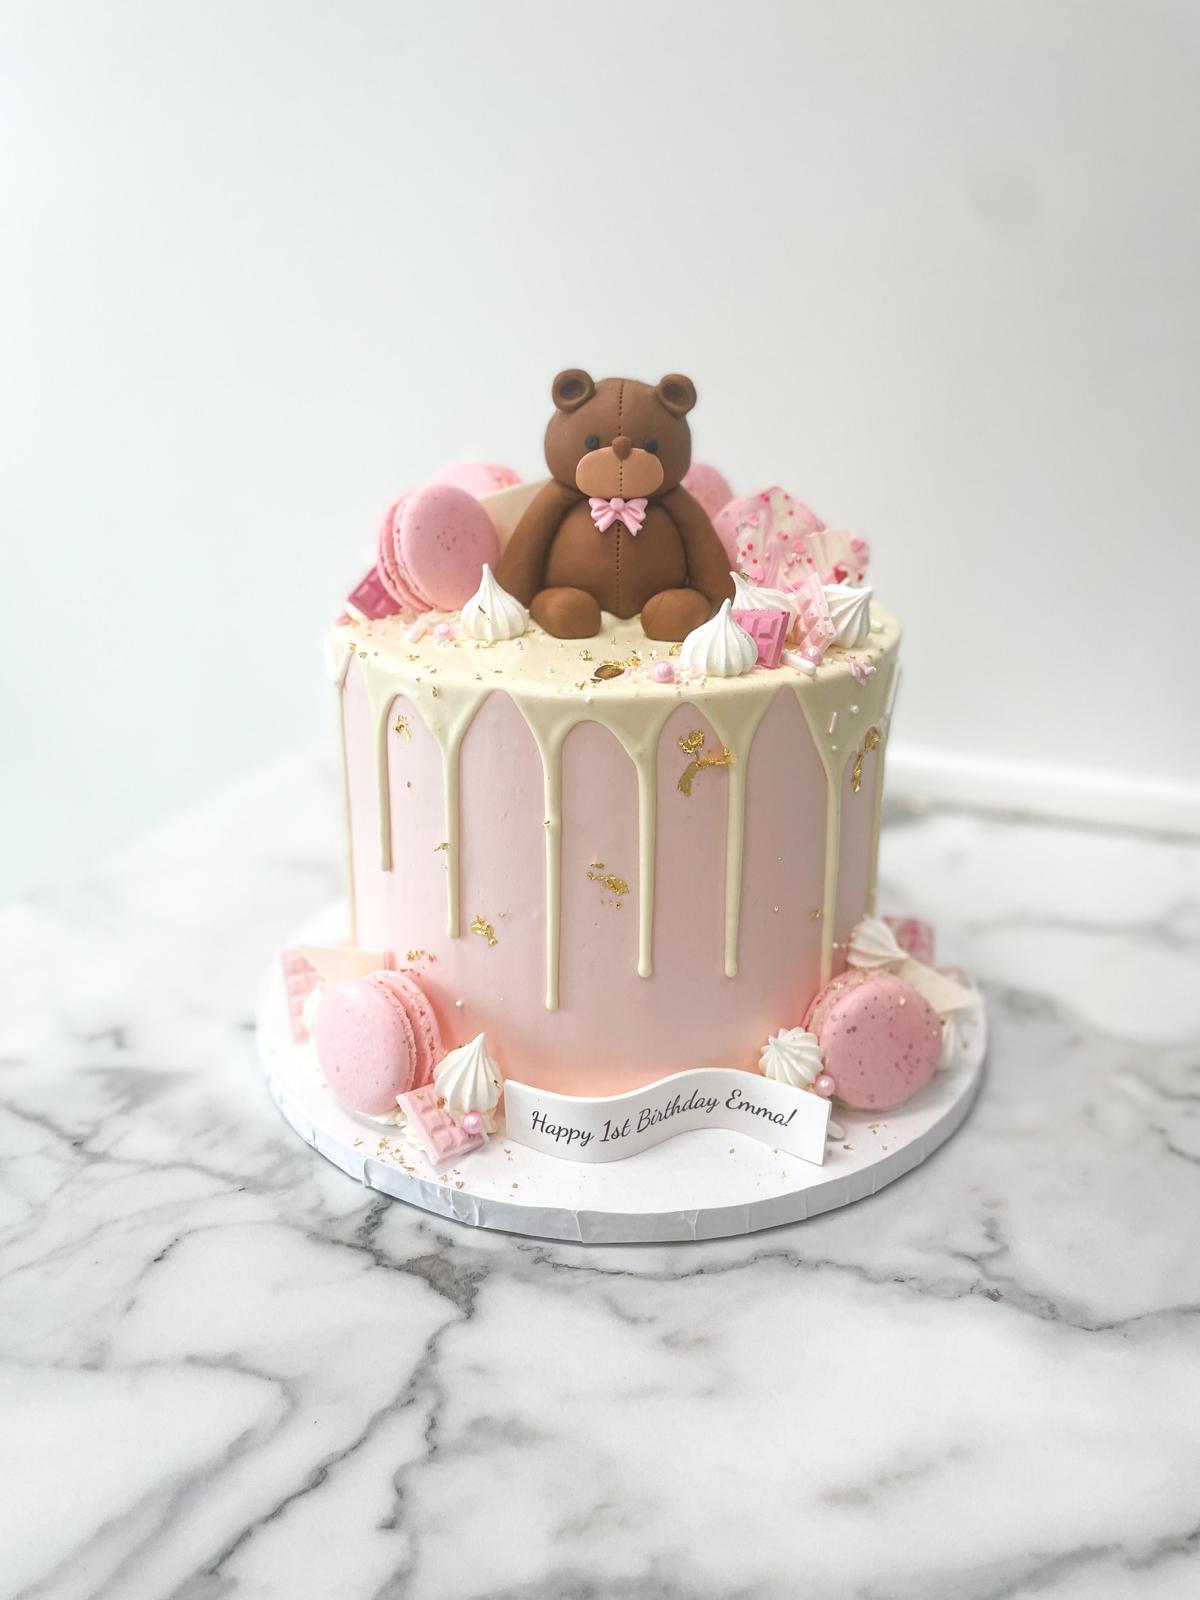 5 Off] Order 'Teddy Bear Shaped Kids Birthday Cake' Online | Urgent Delivery  Across London // Sugaholics™